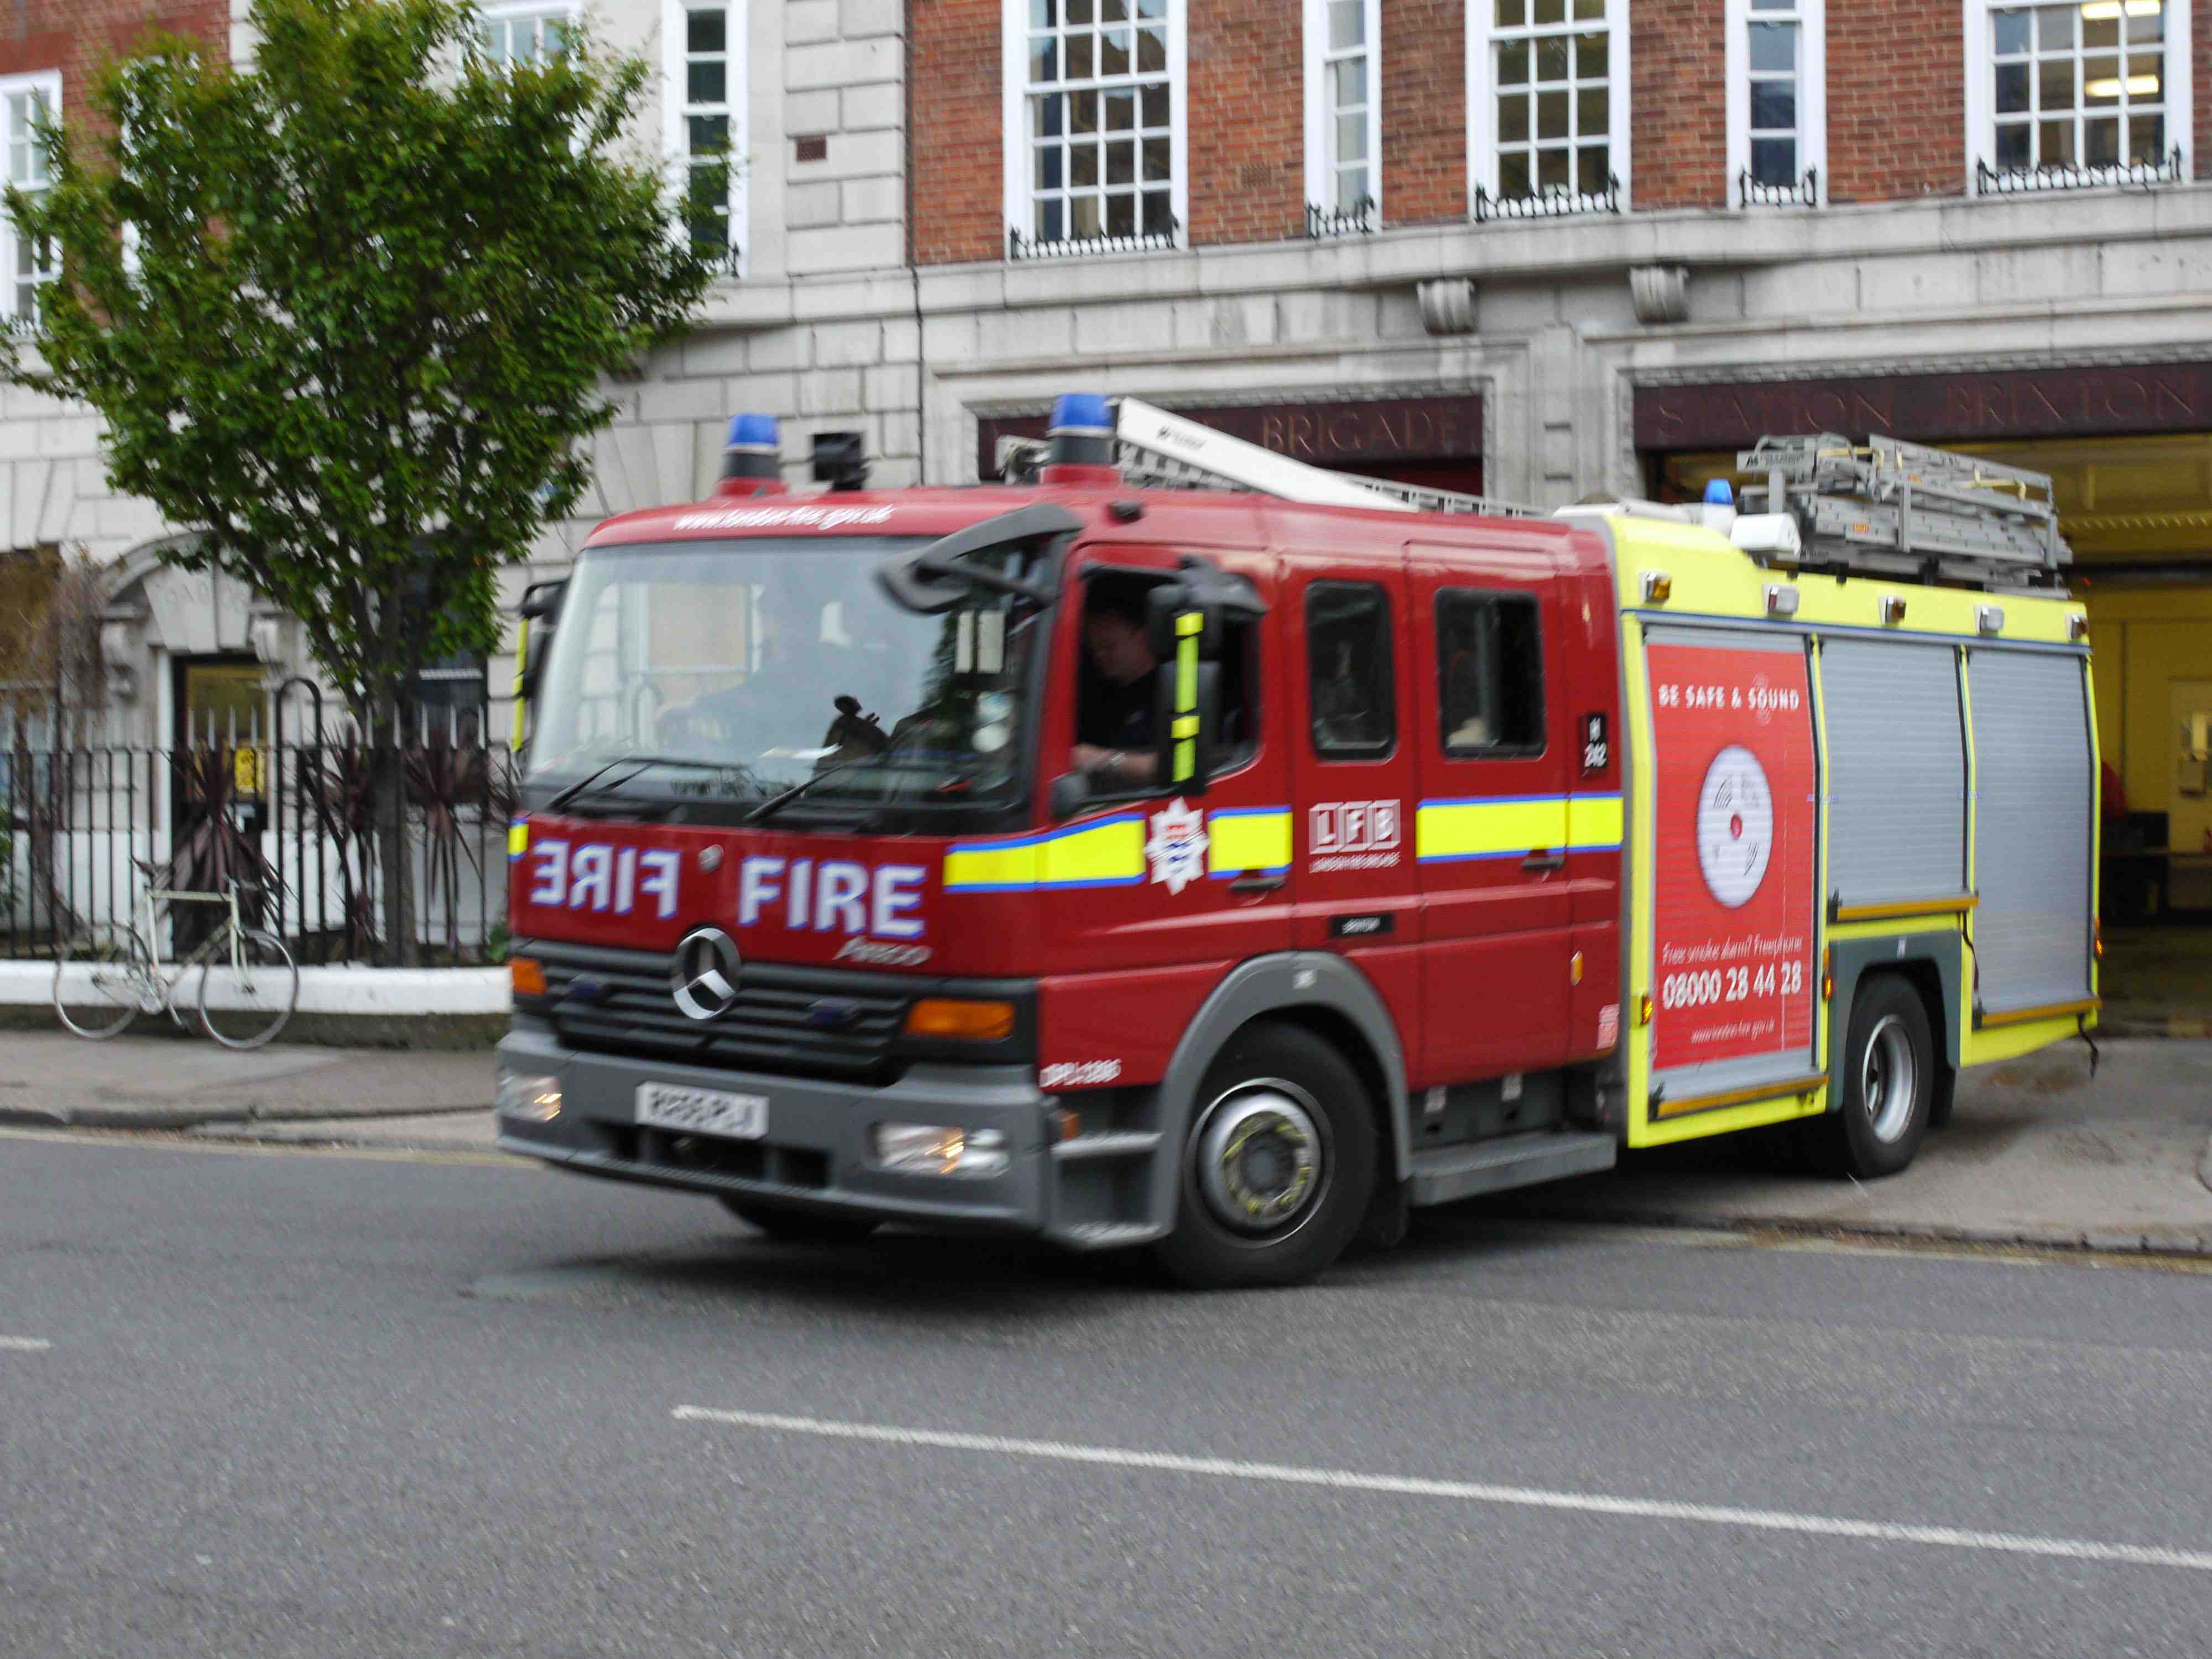 Fire engine from Brixton